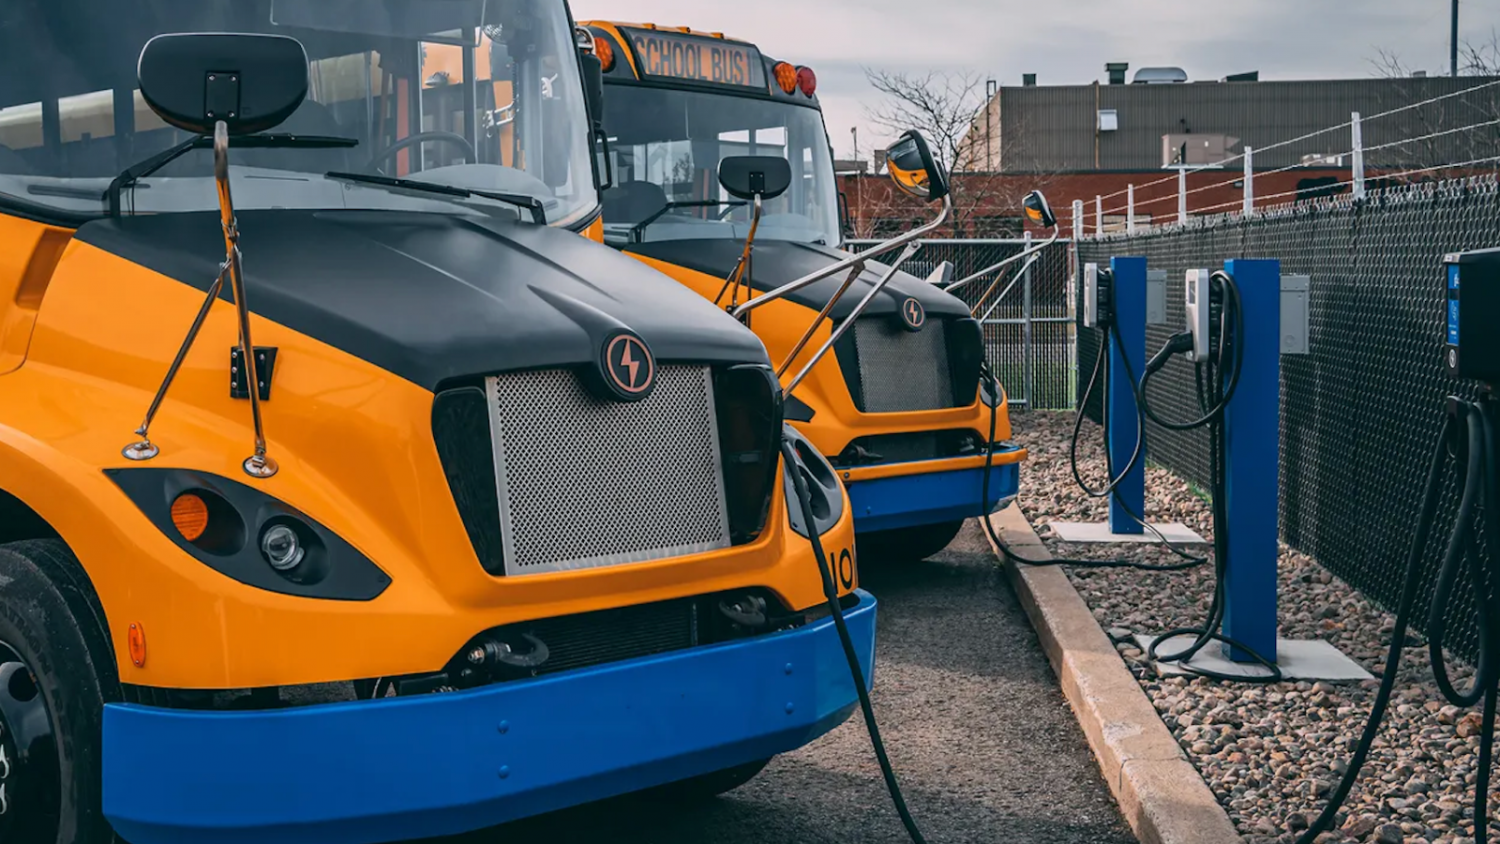 update-epa-releases-new-one-pager-for-the-2022-clean-school-bus-rebate